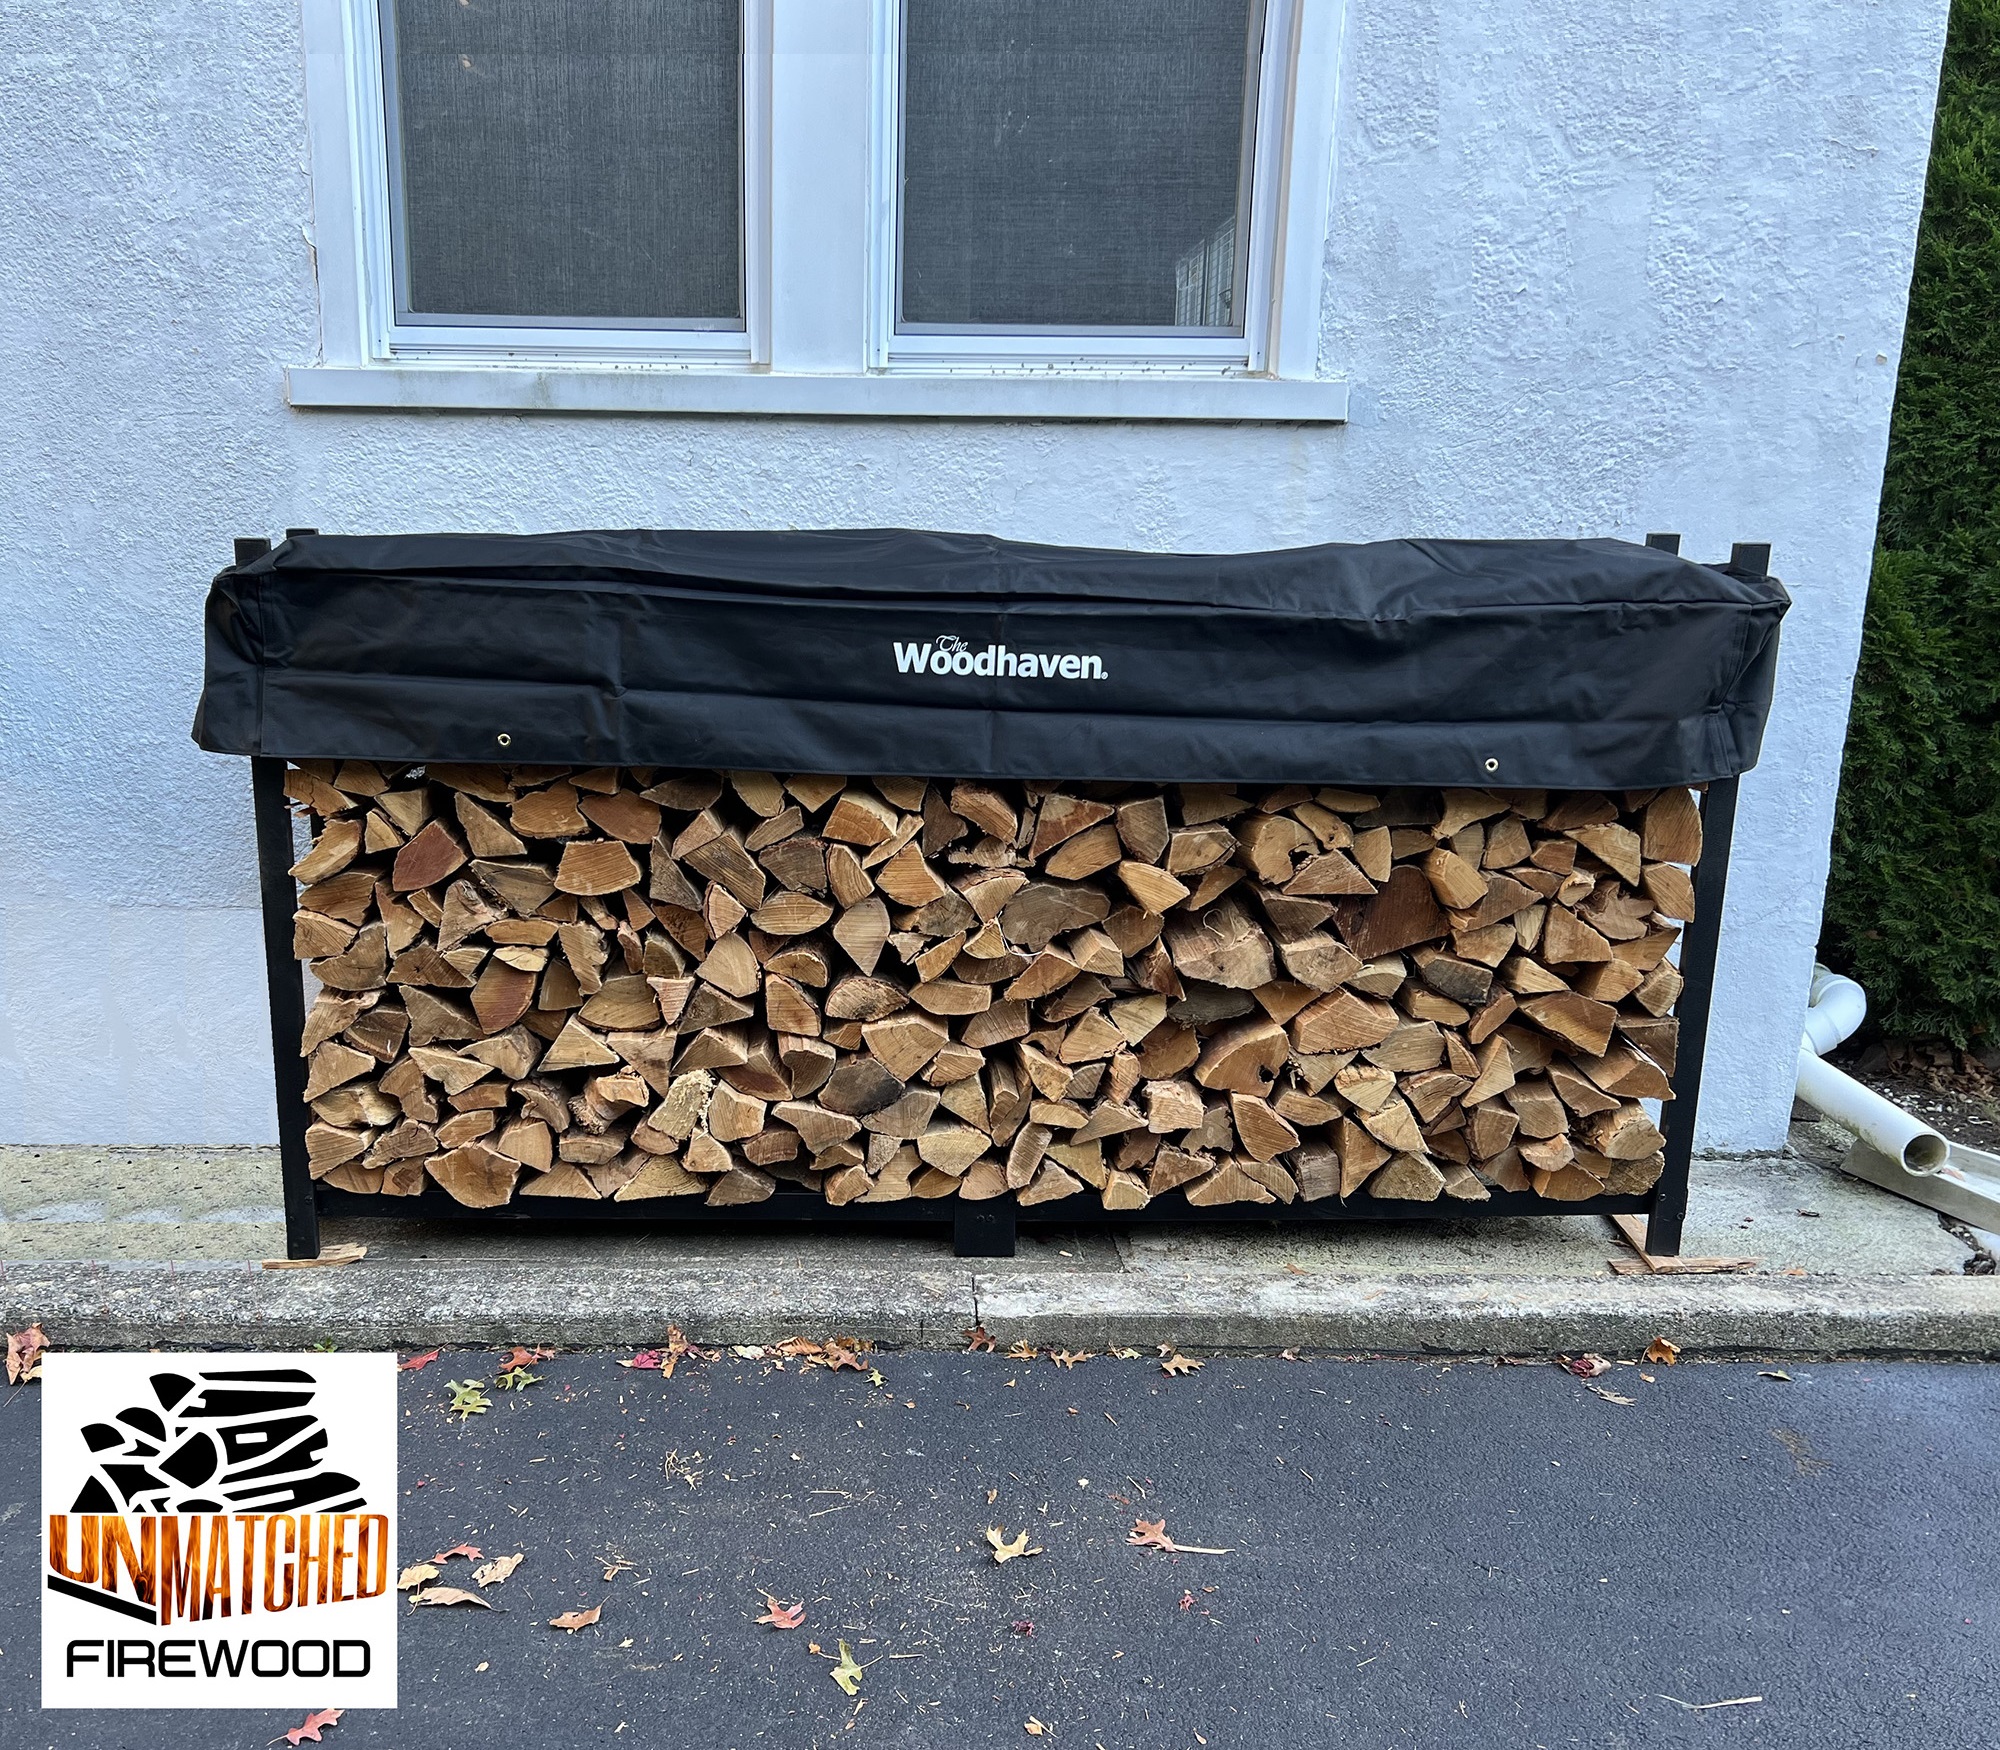 1/3 Cord of Kiln Dried Firewood, Delivered and Stacked Free of Charge